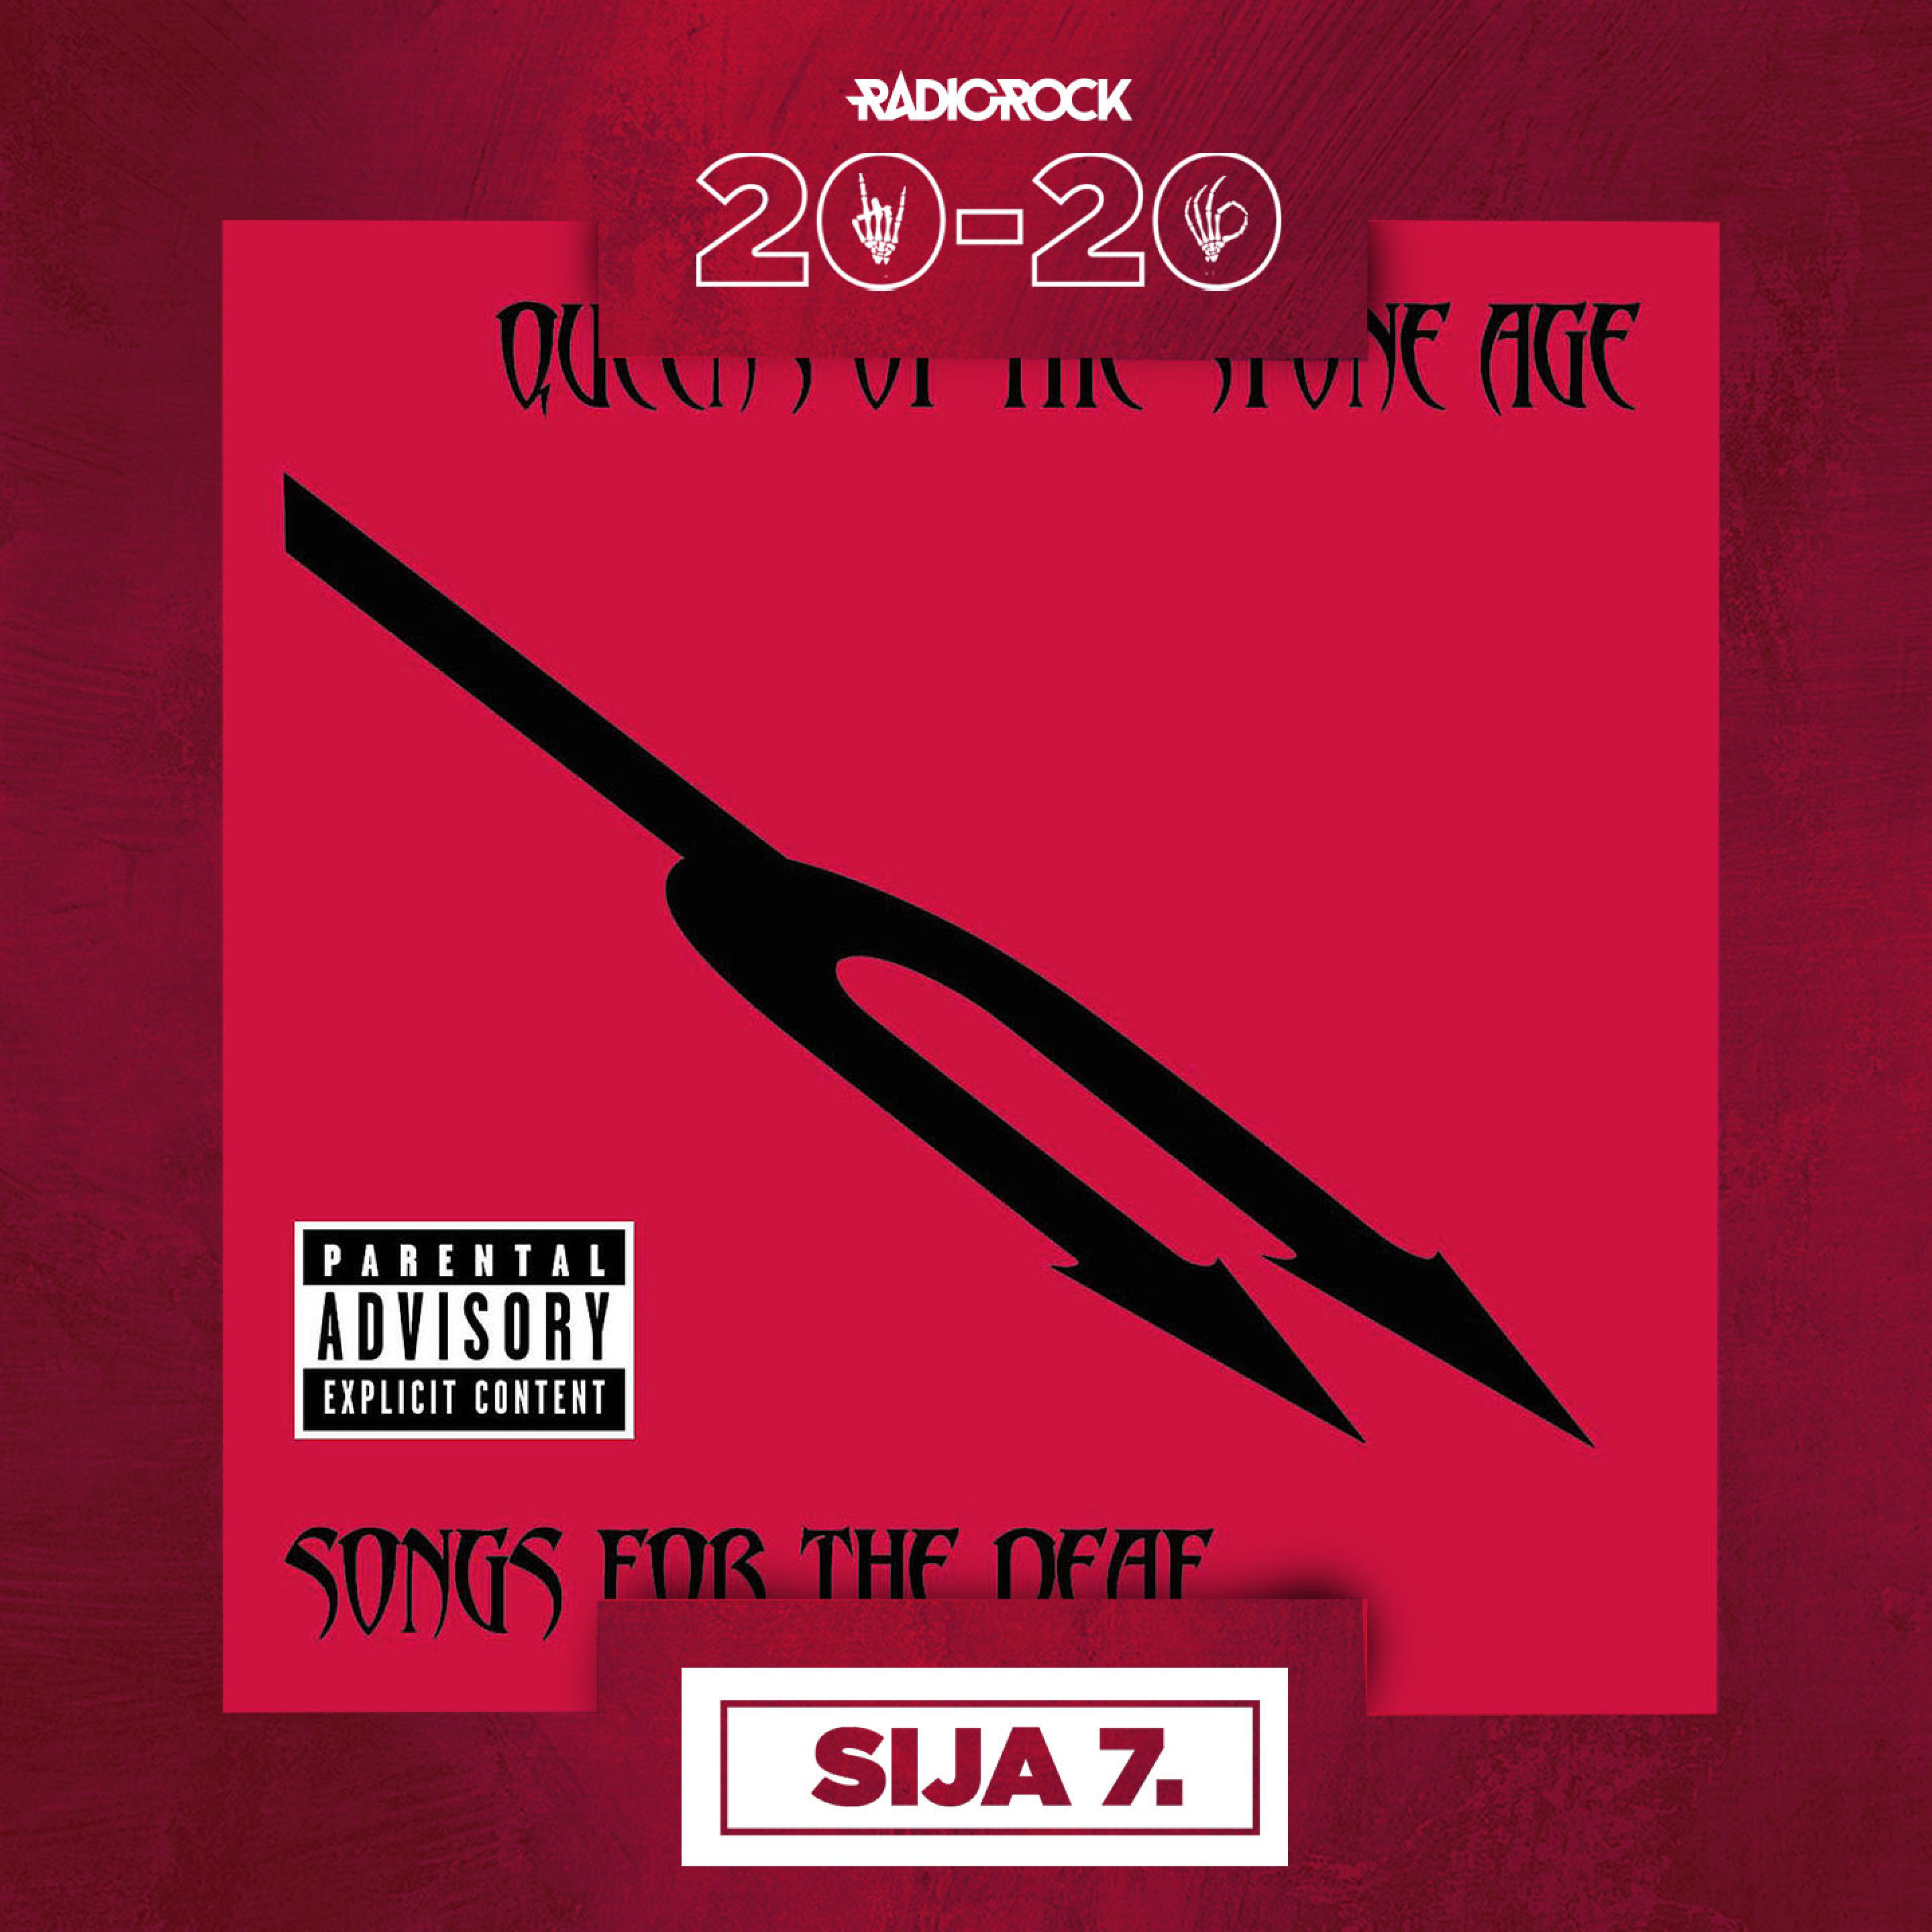 Sija 7. Queens of the Stone Age - Songs for The Deaf